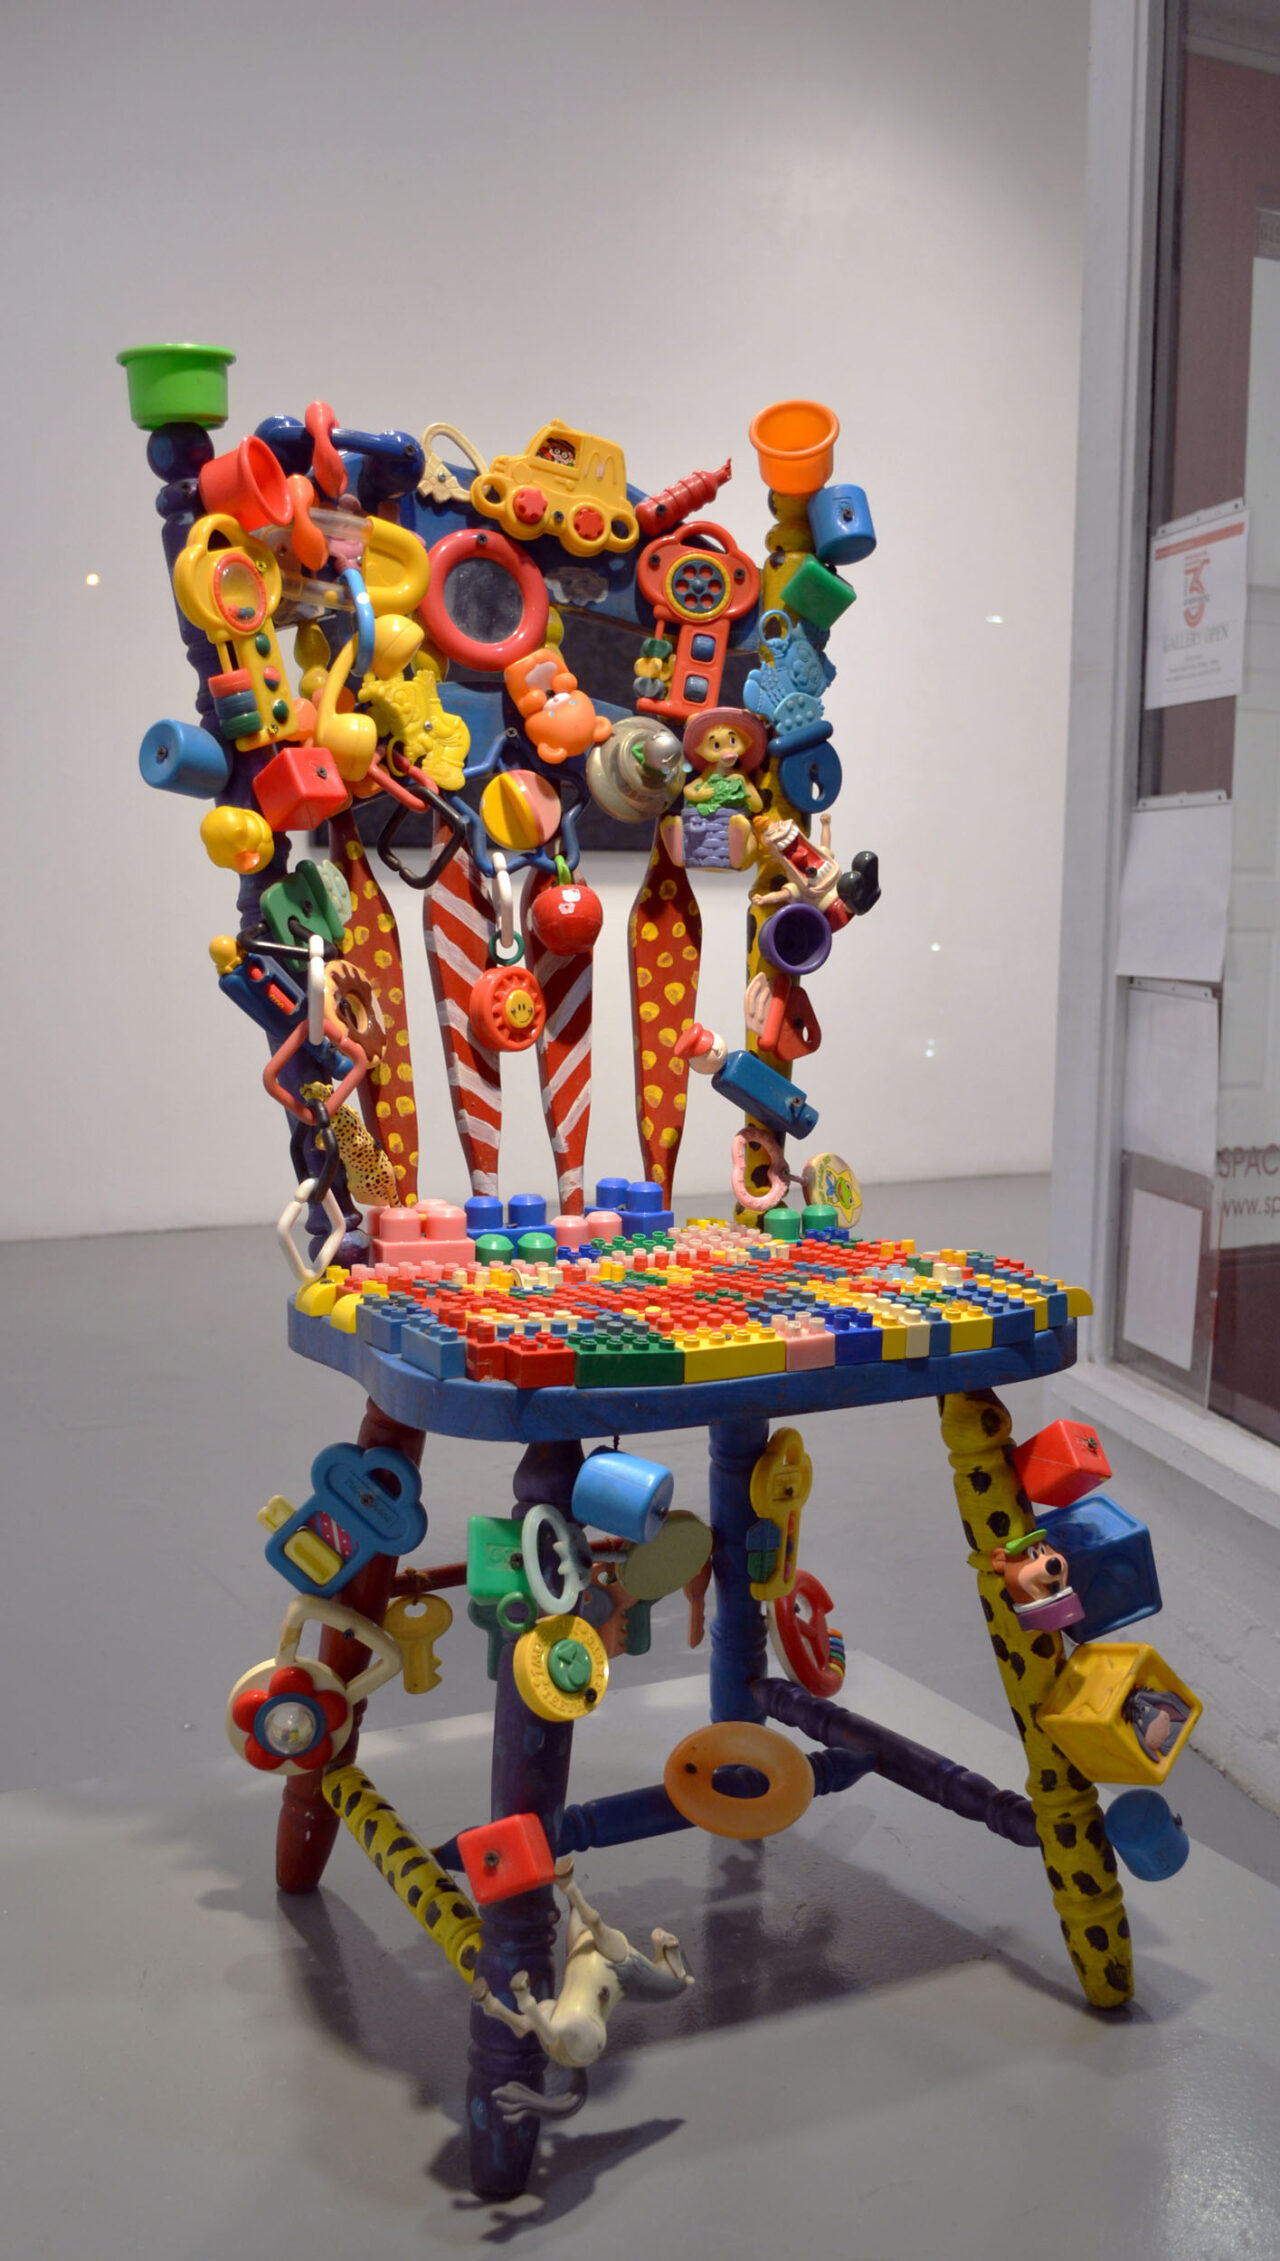 Wooden chair painted and covered with toys